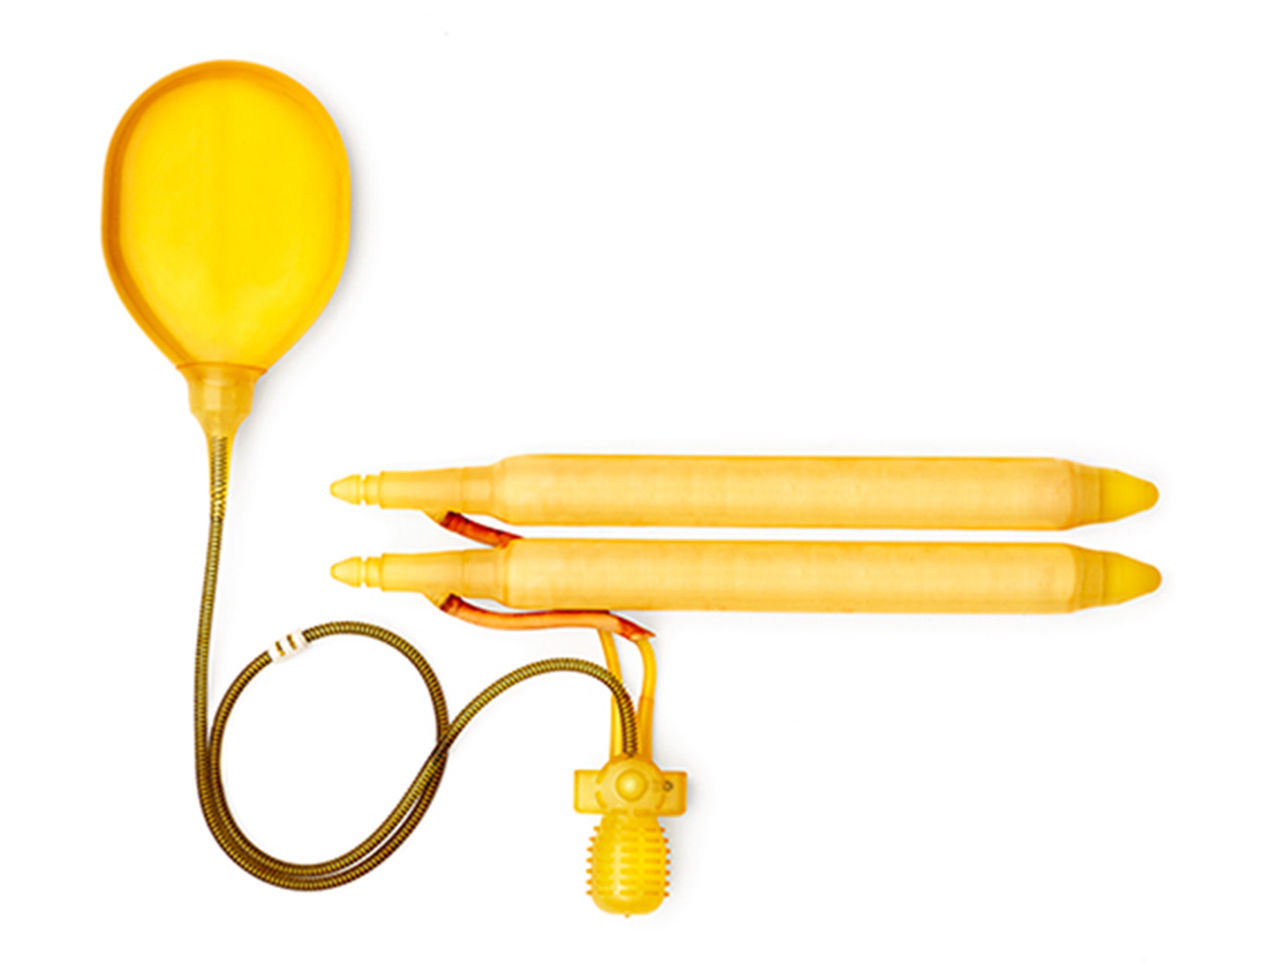 AMS 700™ Inflatable Penile Prosthesis product shot.